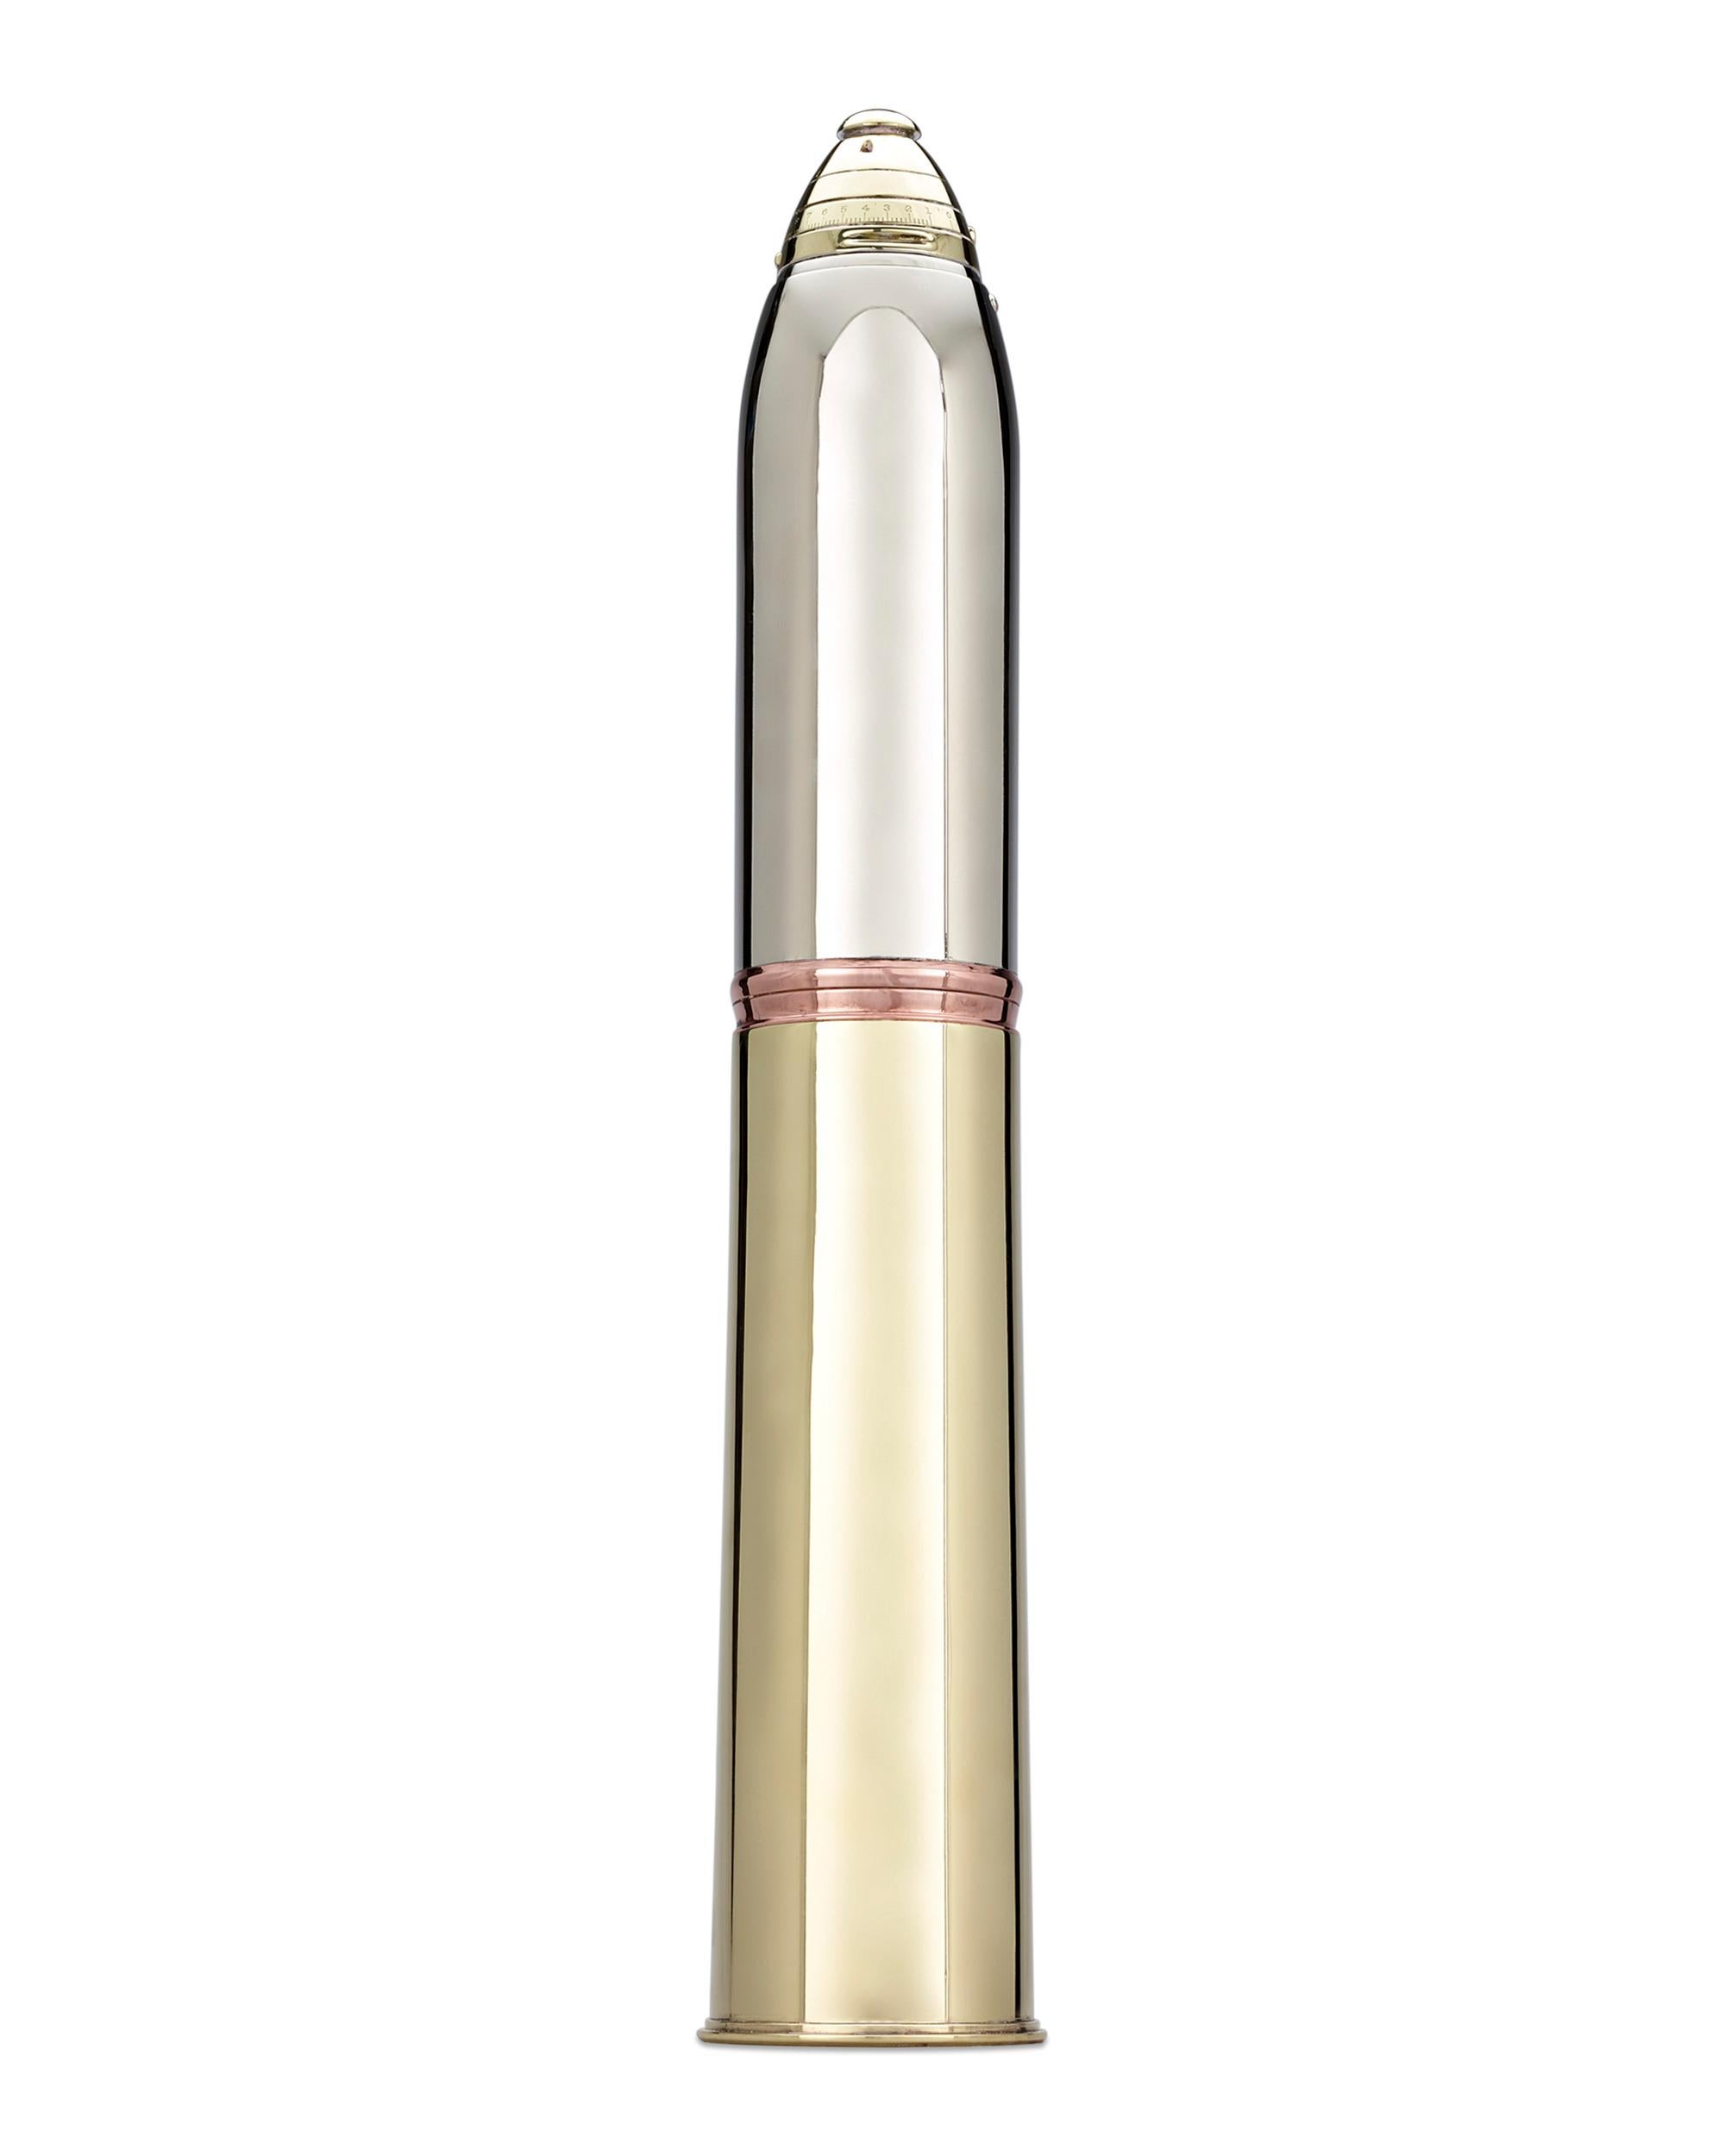 This rare silver-plated artillery shell cocktail shaker was crafted by the celebrated Gorham Silver Company. Sleek and aerodynamic, the shaker is one of the tallest ever produced and, as a drink-making kit, it is a model of efficiency. The base of